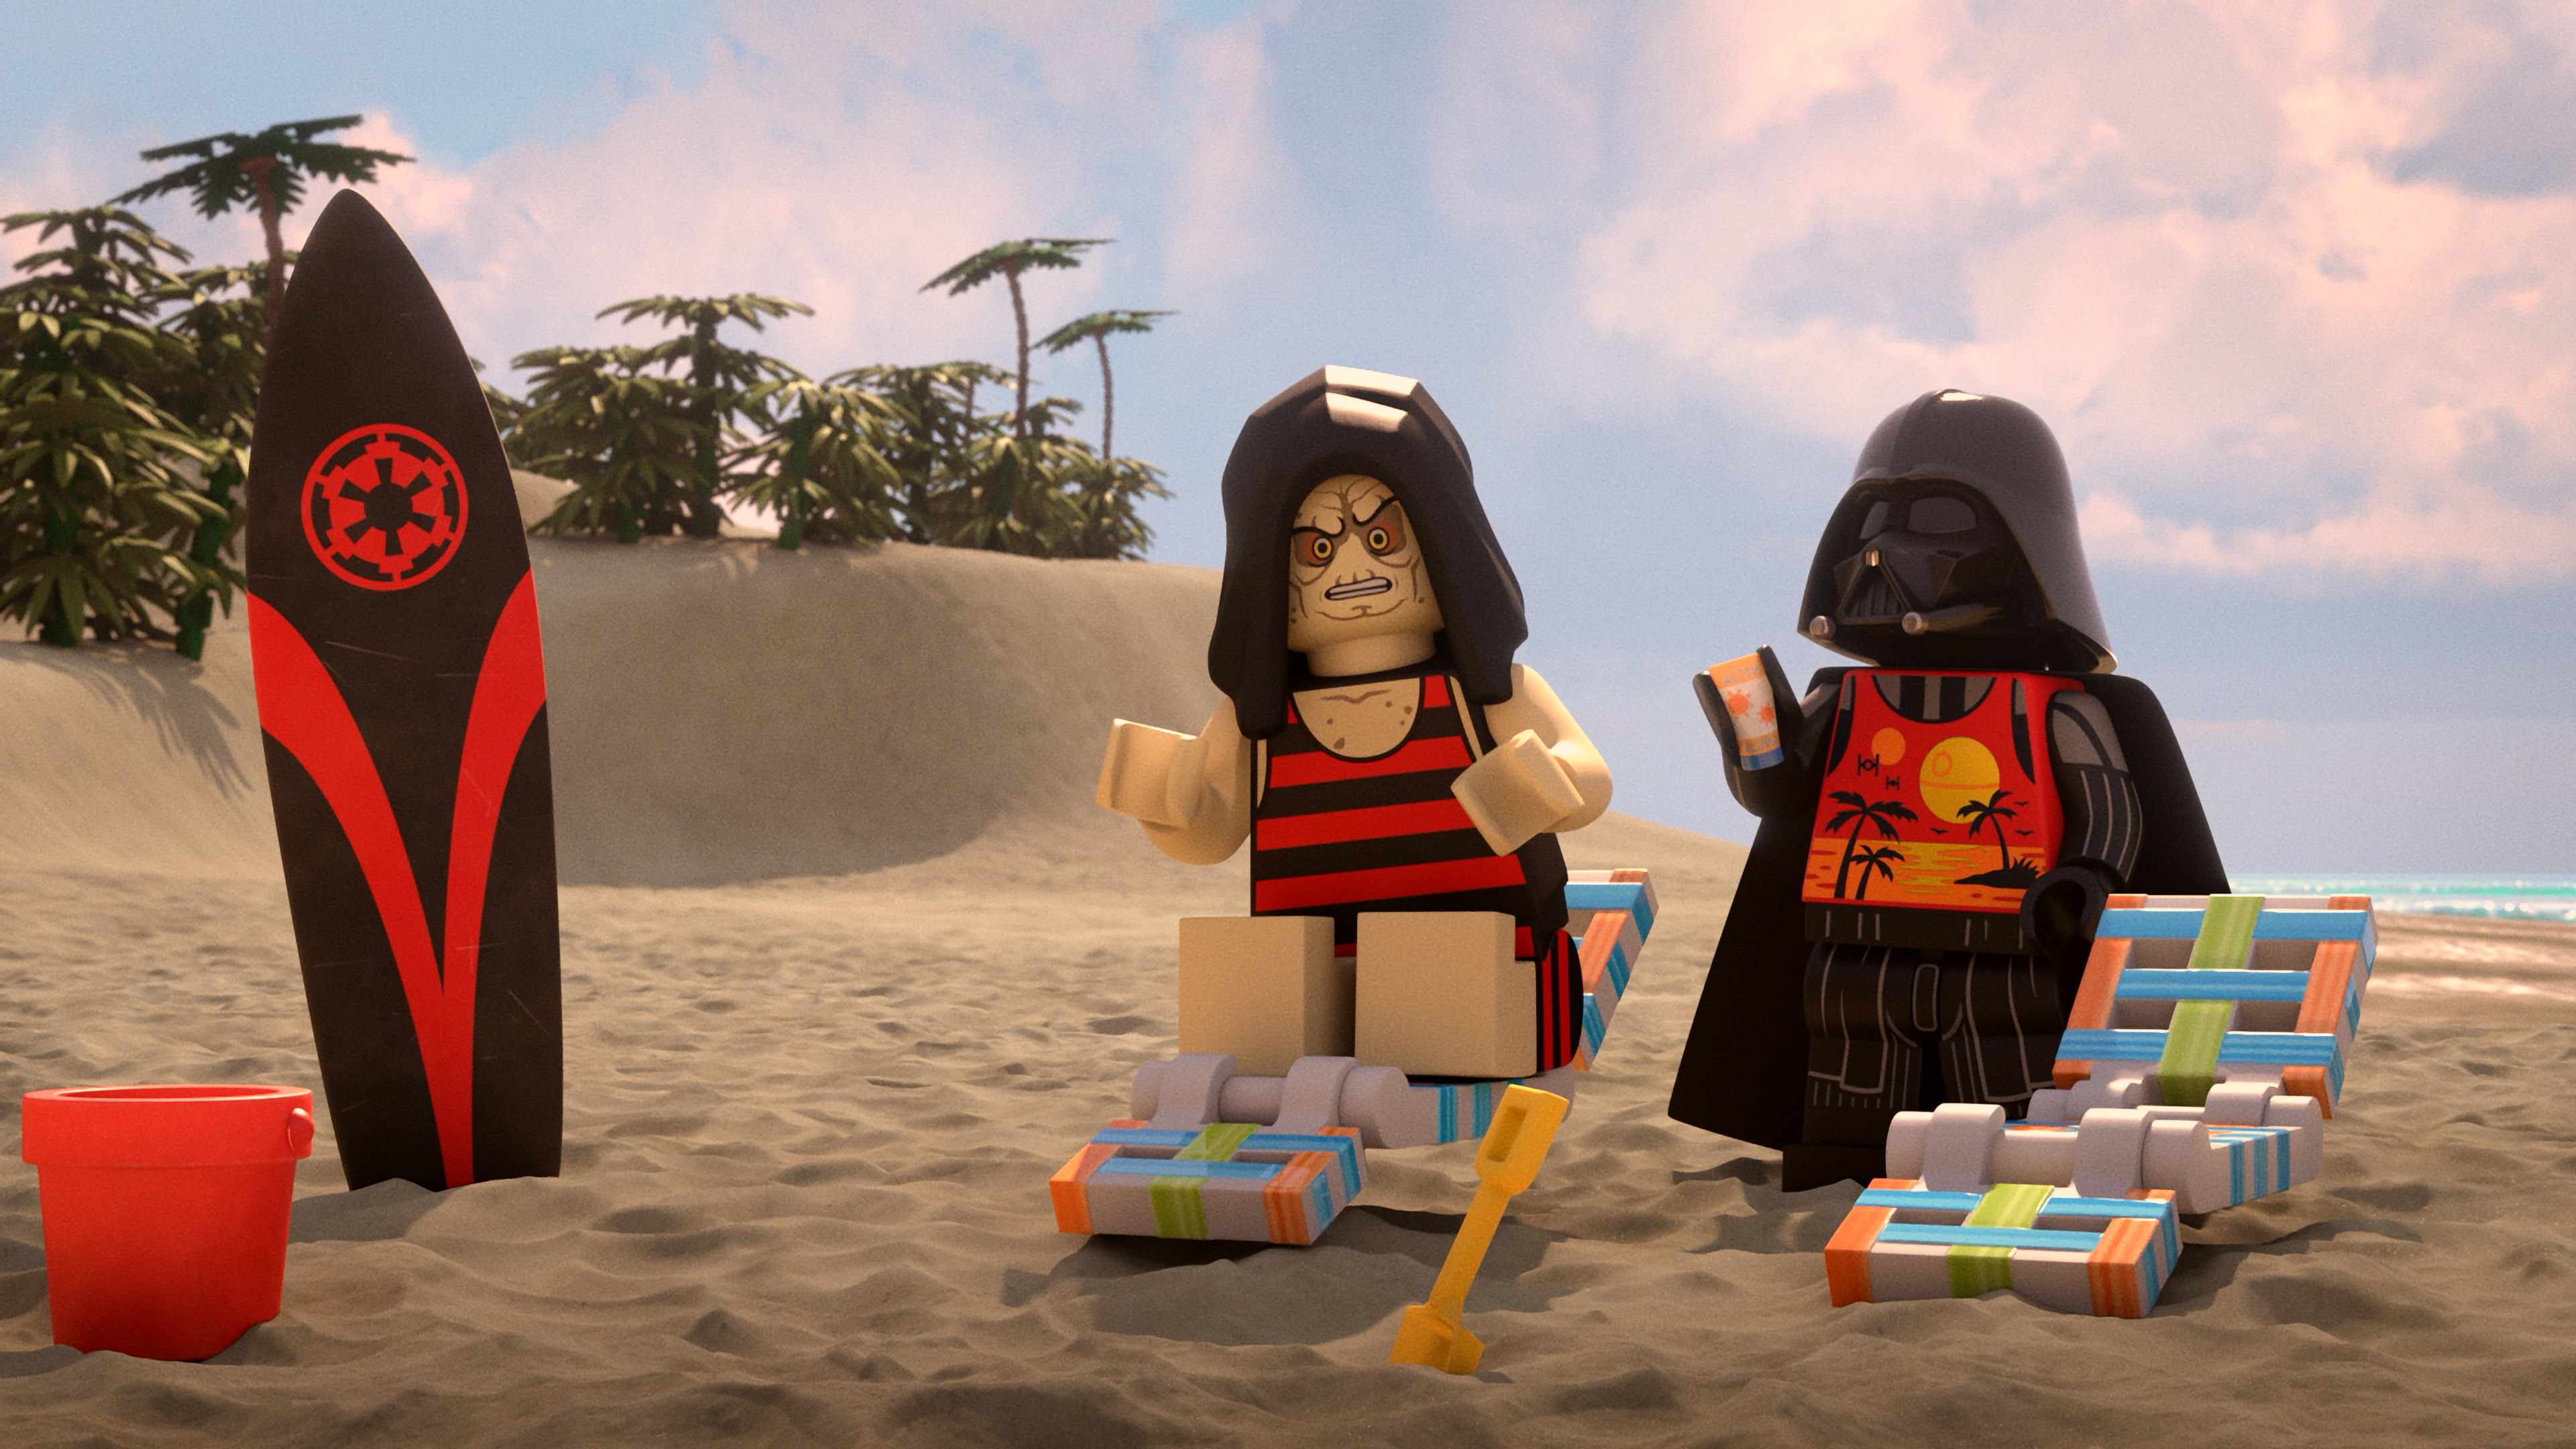 ‘LEGO Star Wars Summer Vacation’ Review: The Best of The Franchise (By Default)